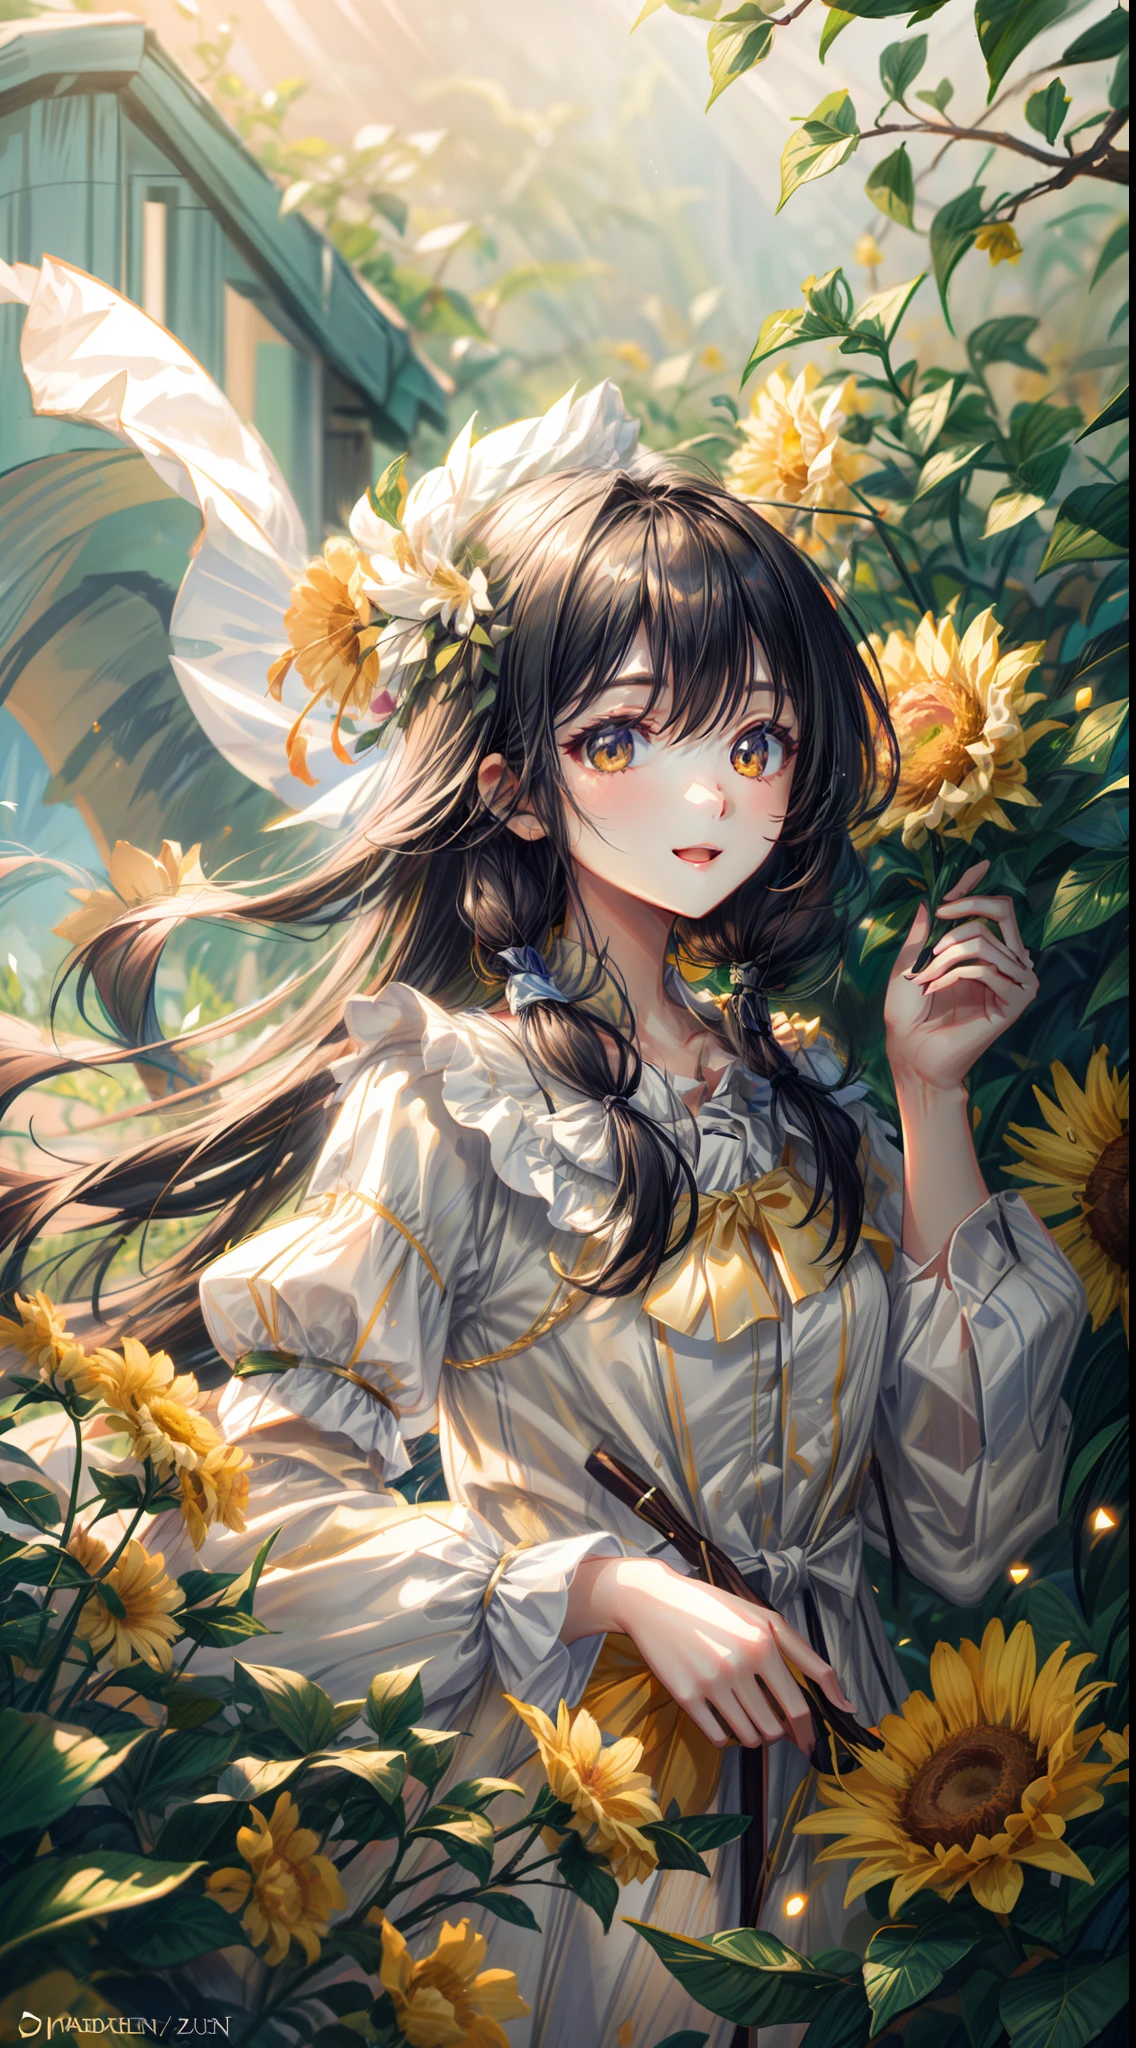 1 girl, upper body, single focus, radiant beauty, sun-themed attire, joyful smile, (sunny meadow: 1.4), (radiant happiness: 1.3), solar features, joyful aura, [depth of field, ambient lighting, sunlit meadow foreground, blissful sunshine in the background], The Sun, illumination, happiness and vitality, (radiant sunbeams), (flower-strewn path: 1.2), intricate details, enhanced lighting.